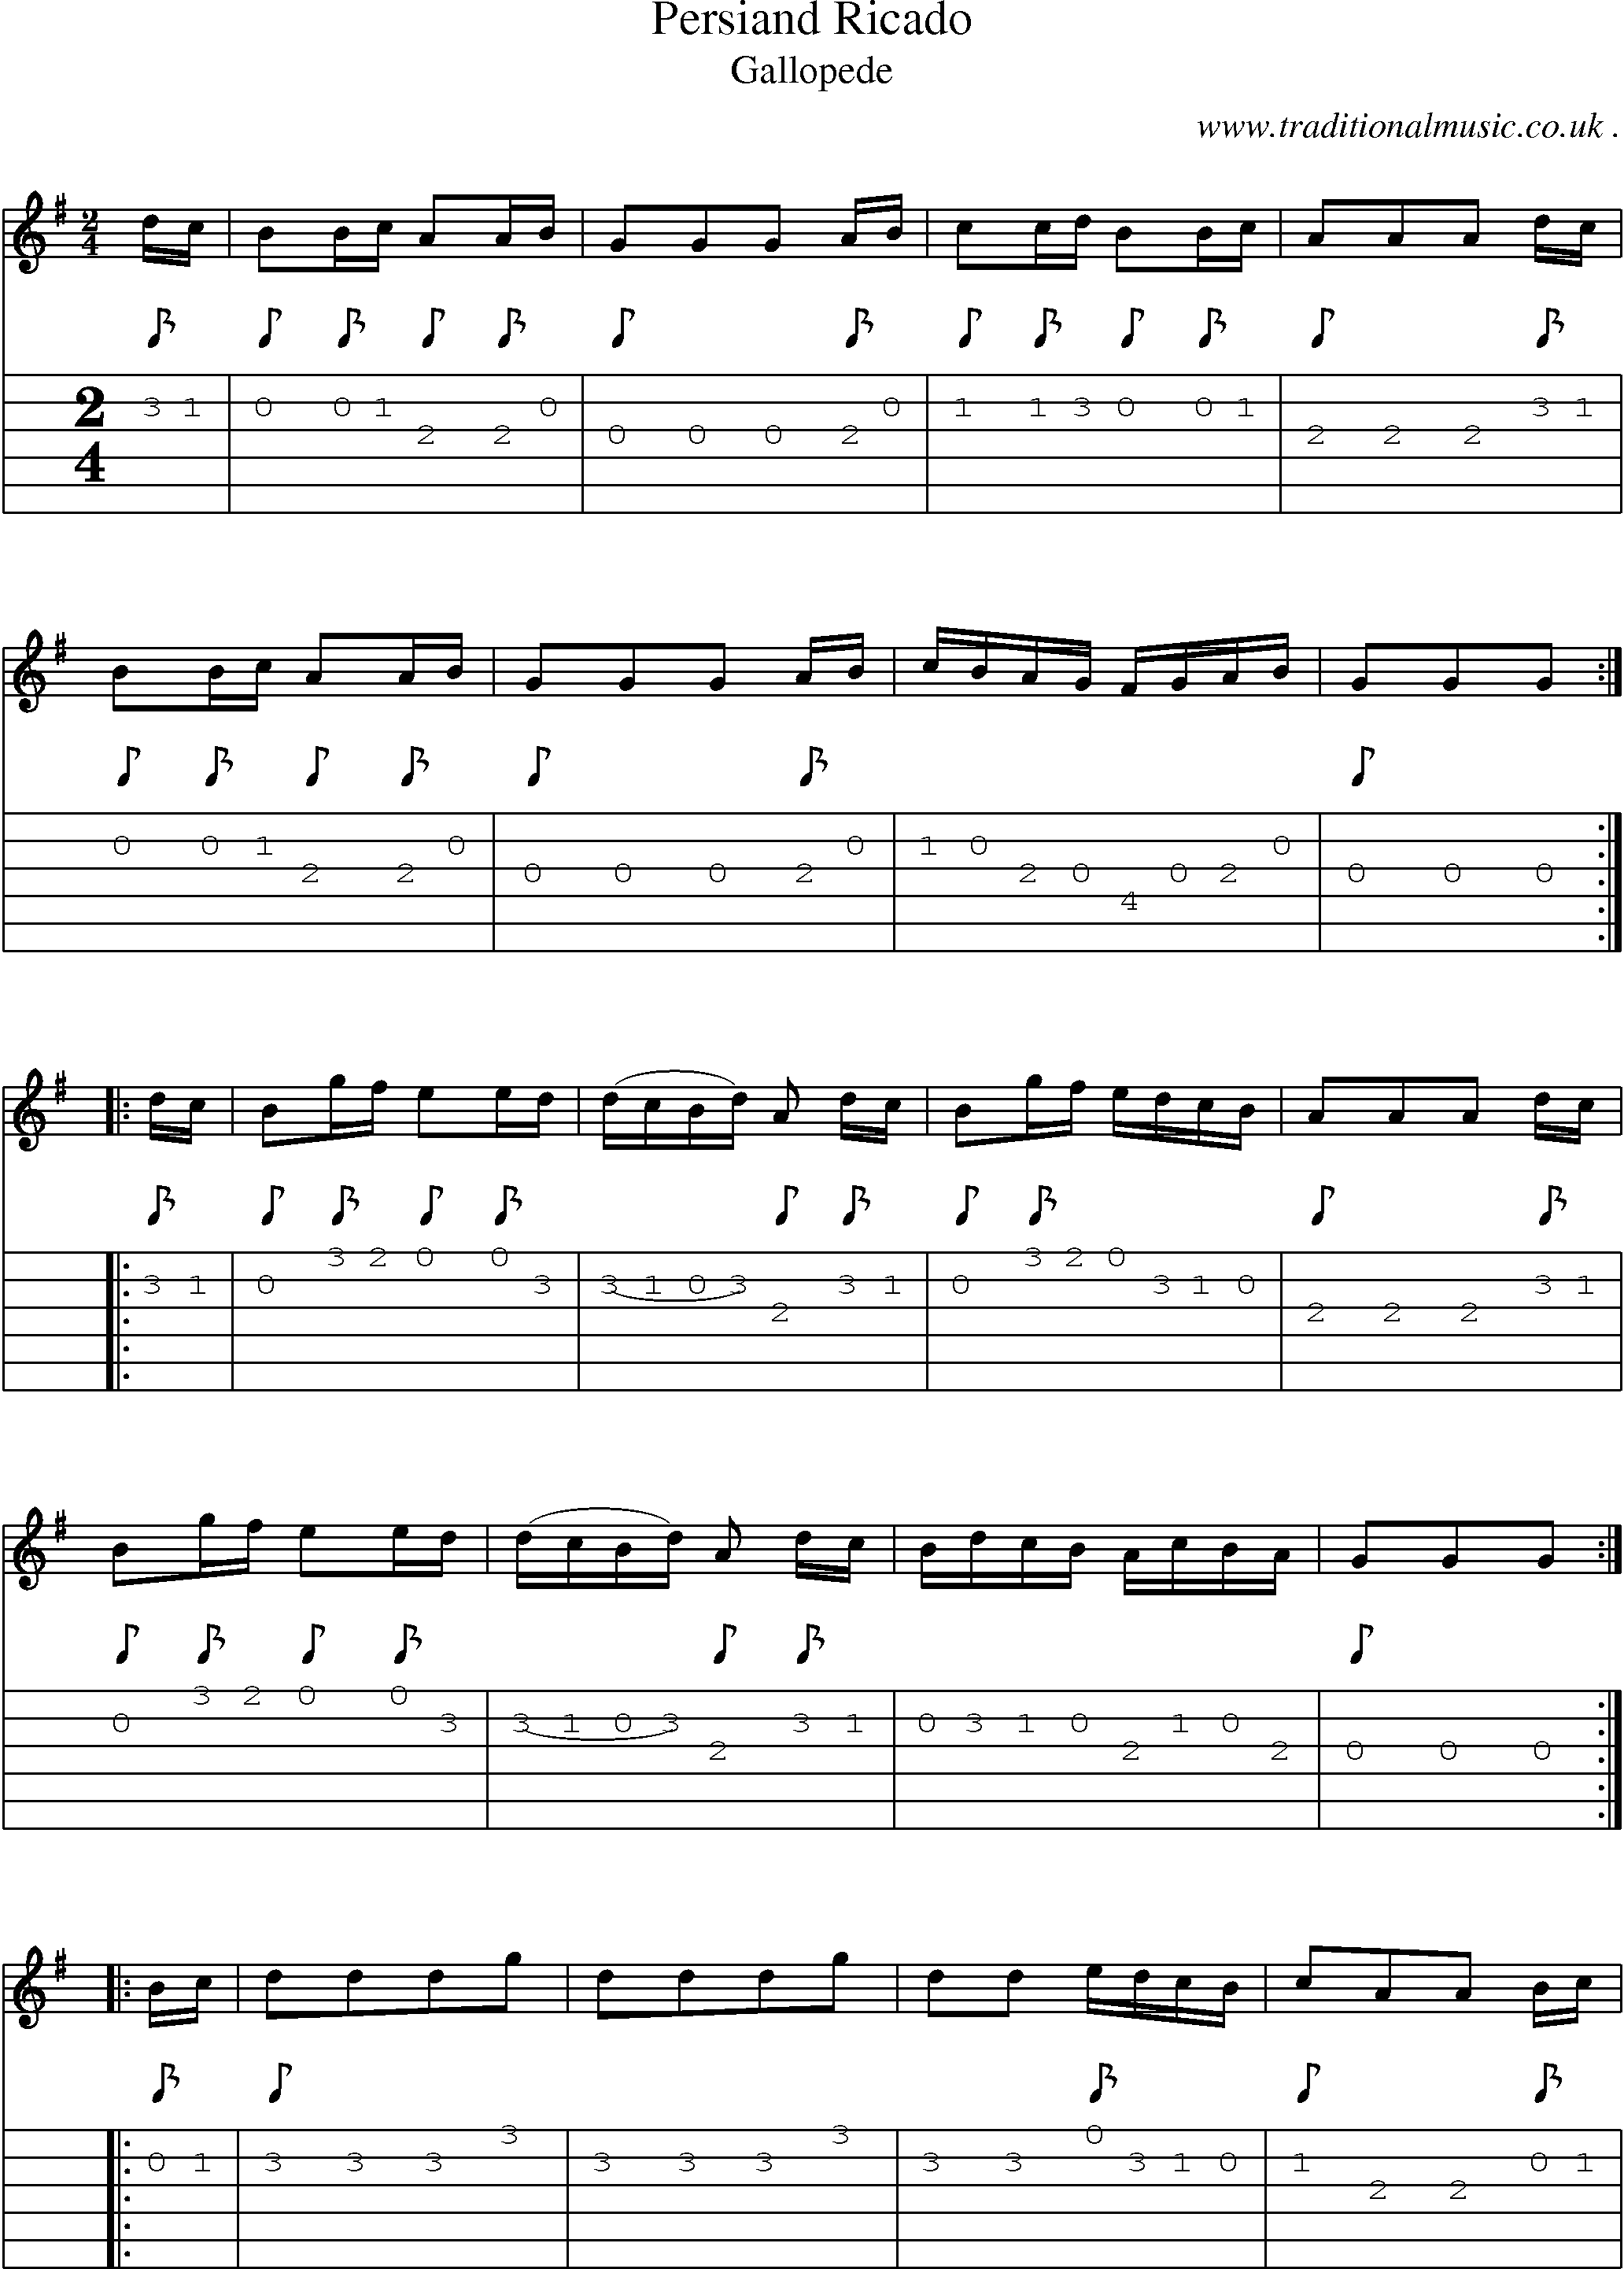 Sheet-Music and Guitar Tabs for Persiand Ricado